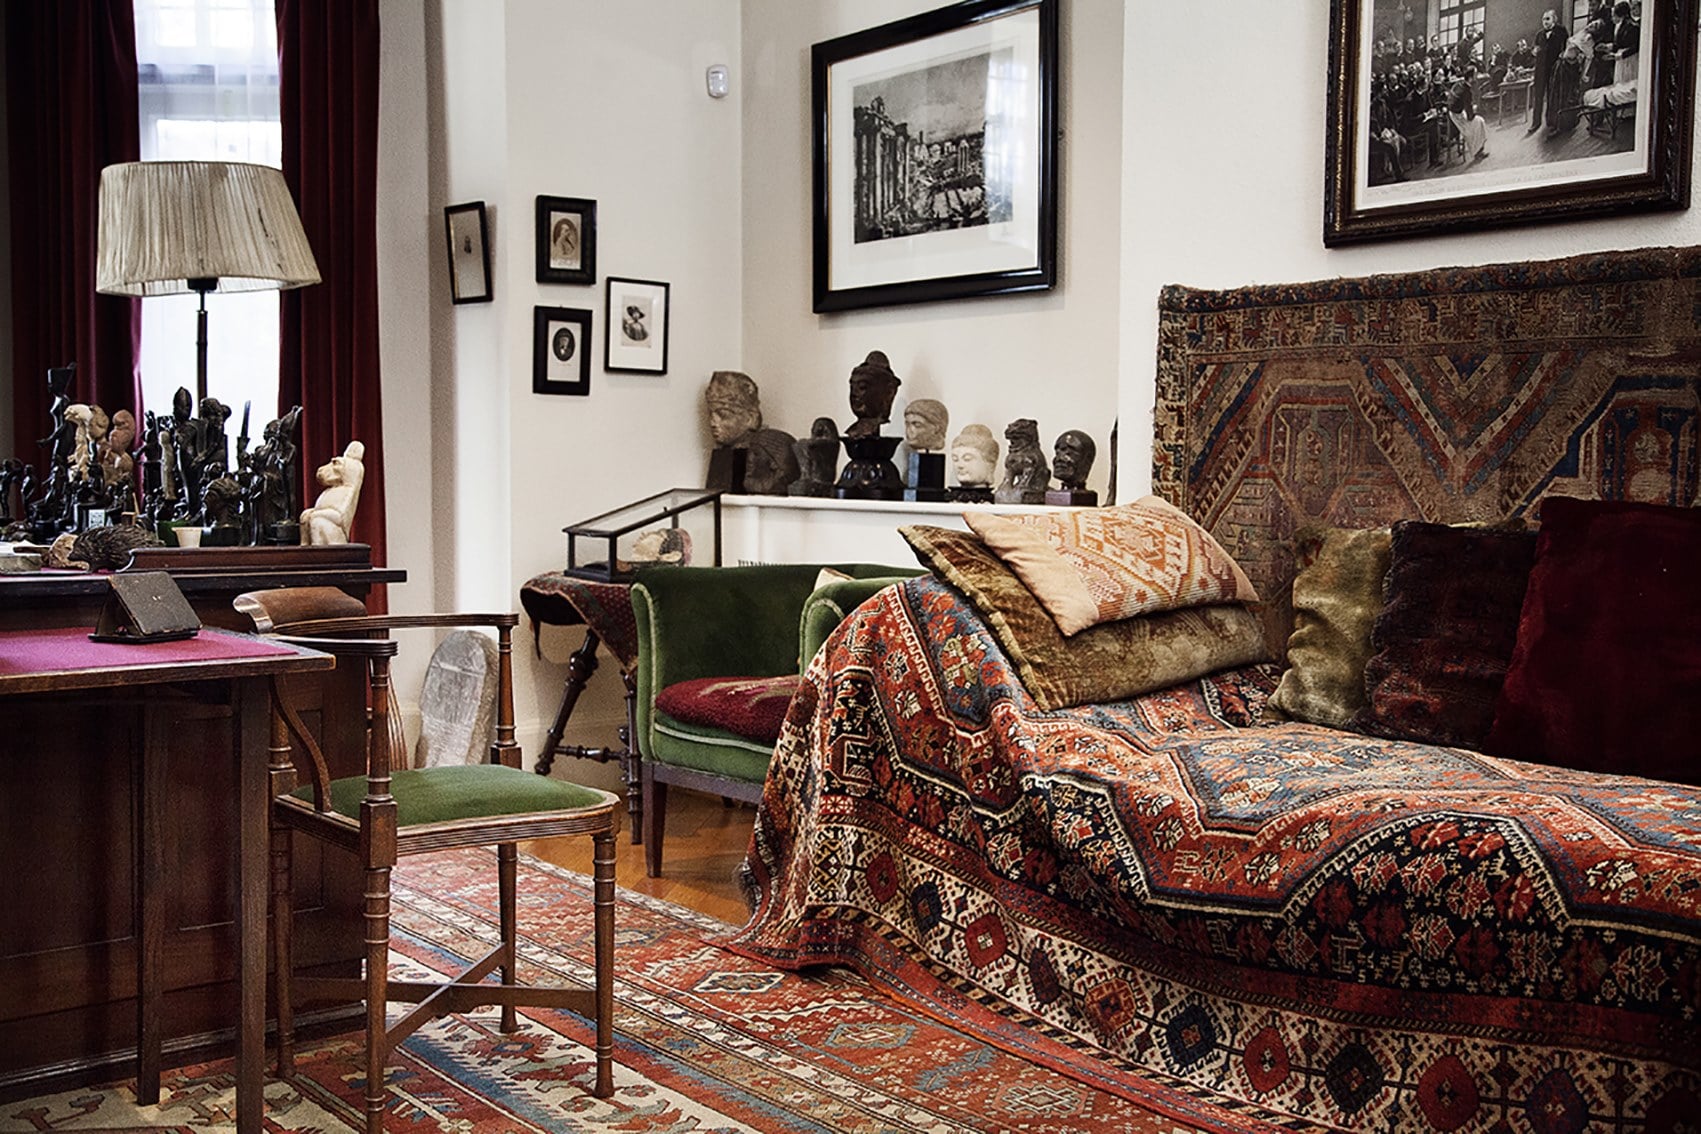 The Freud Museum